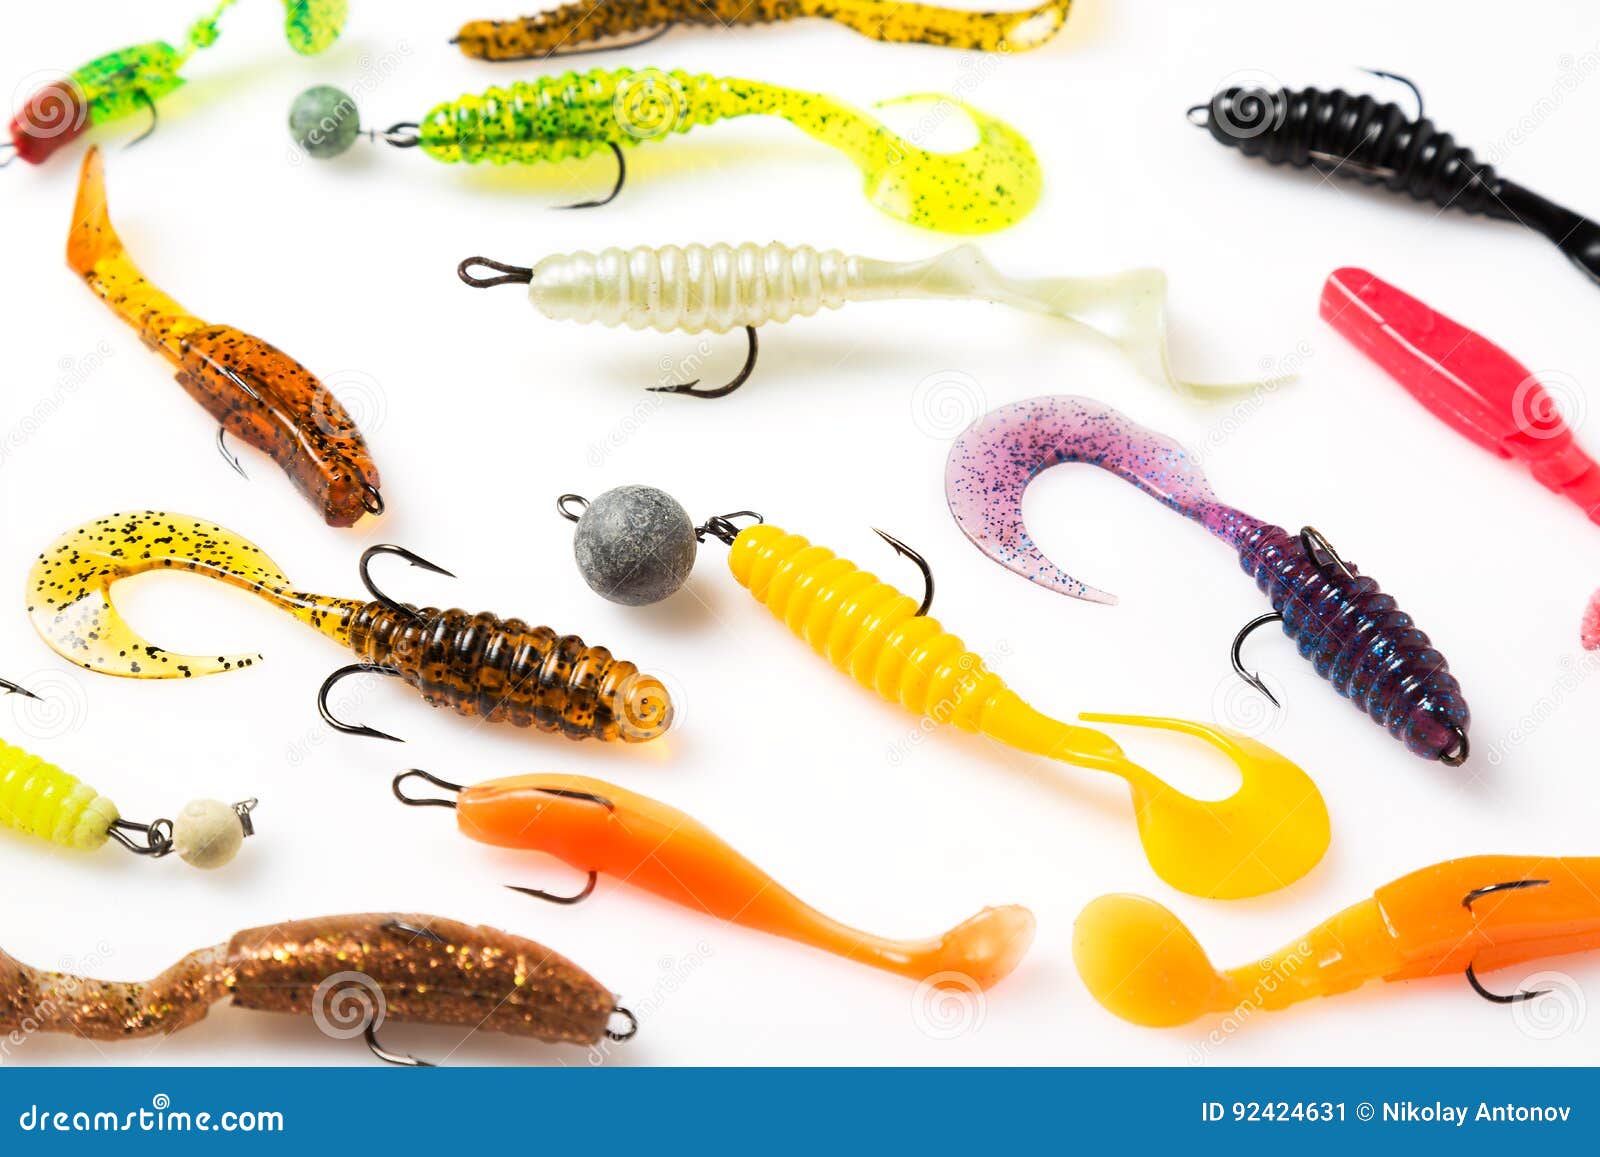 https://thumbs.dreamstime.com/z/colorful-silicone-plastic-fishing-baits-isolated-white-background-selective-focus-92424631.jpg